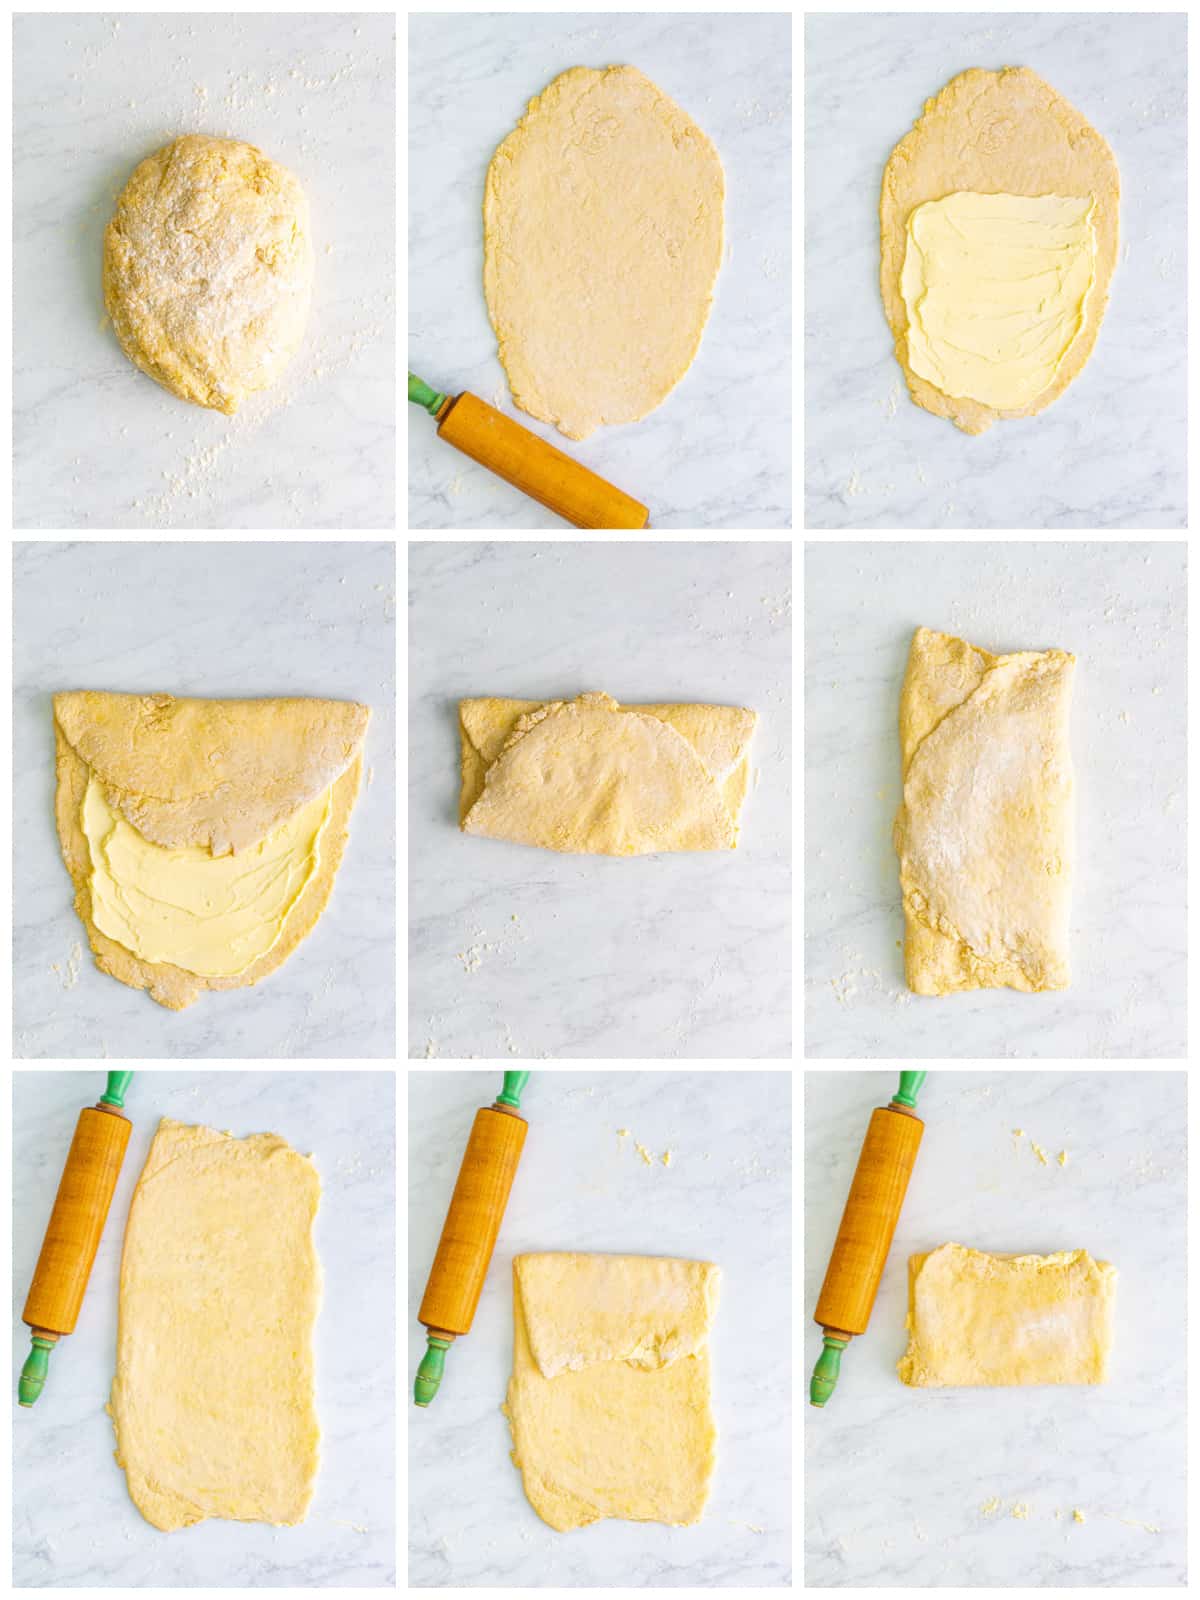 Step by step photos on how to fold the dough for the Homemade Cinnamon Rolls.